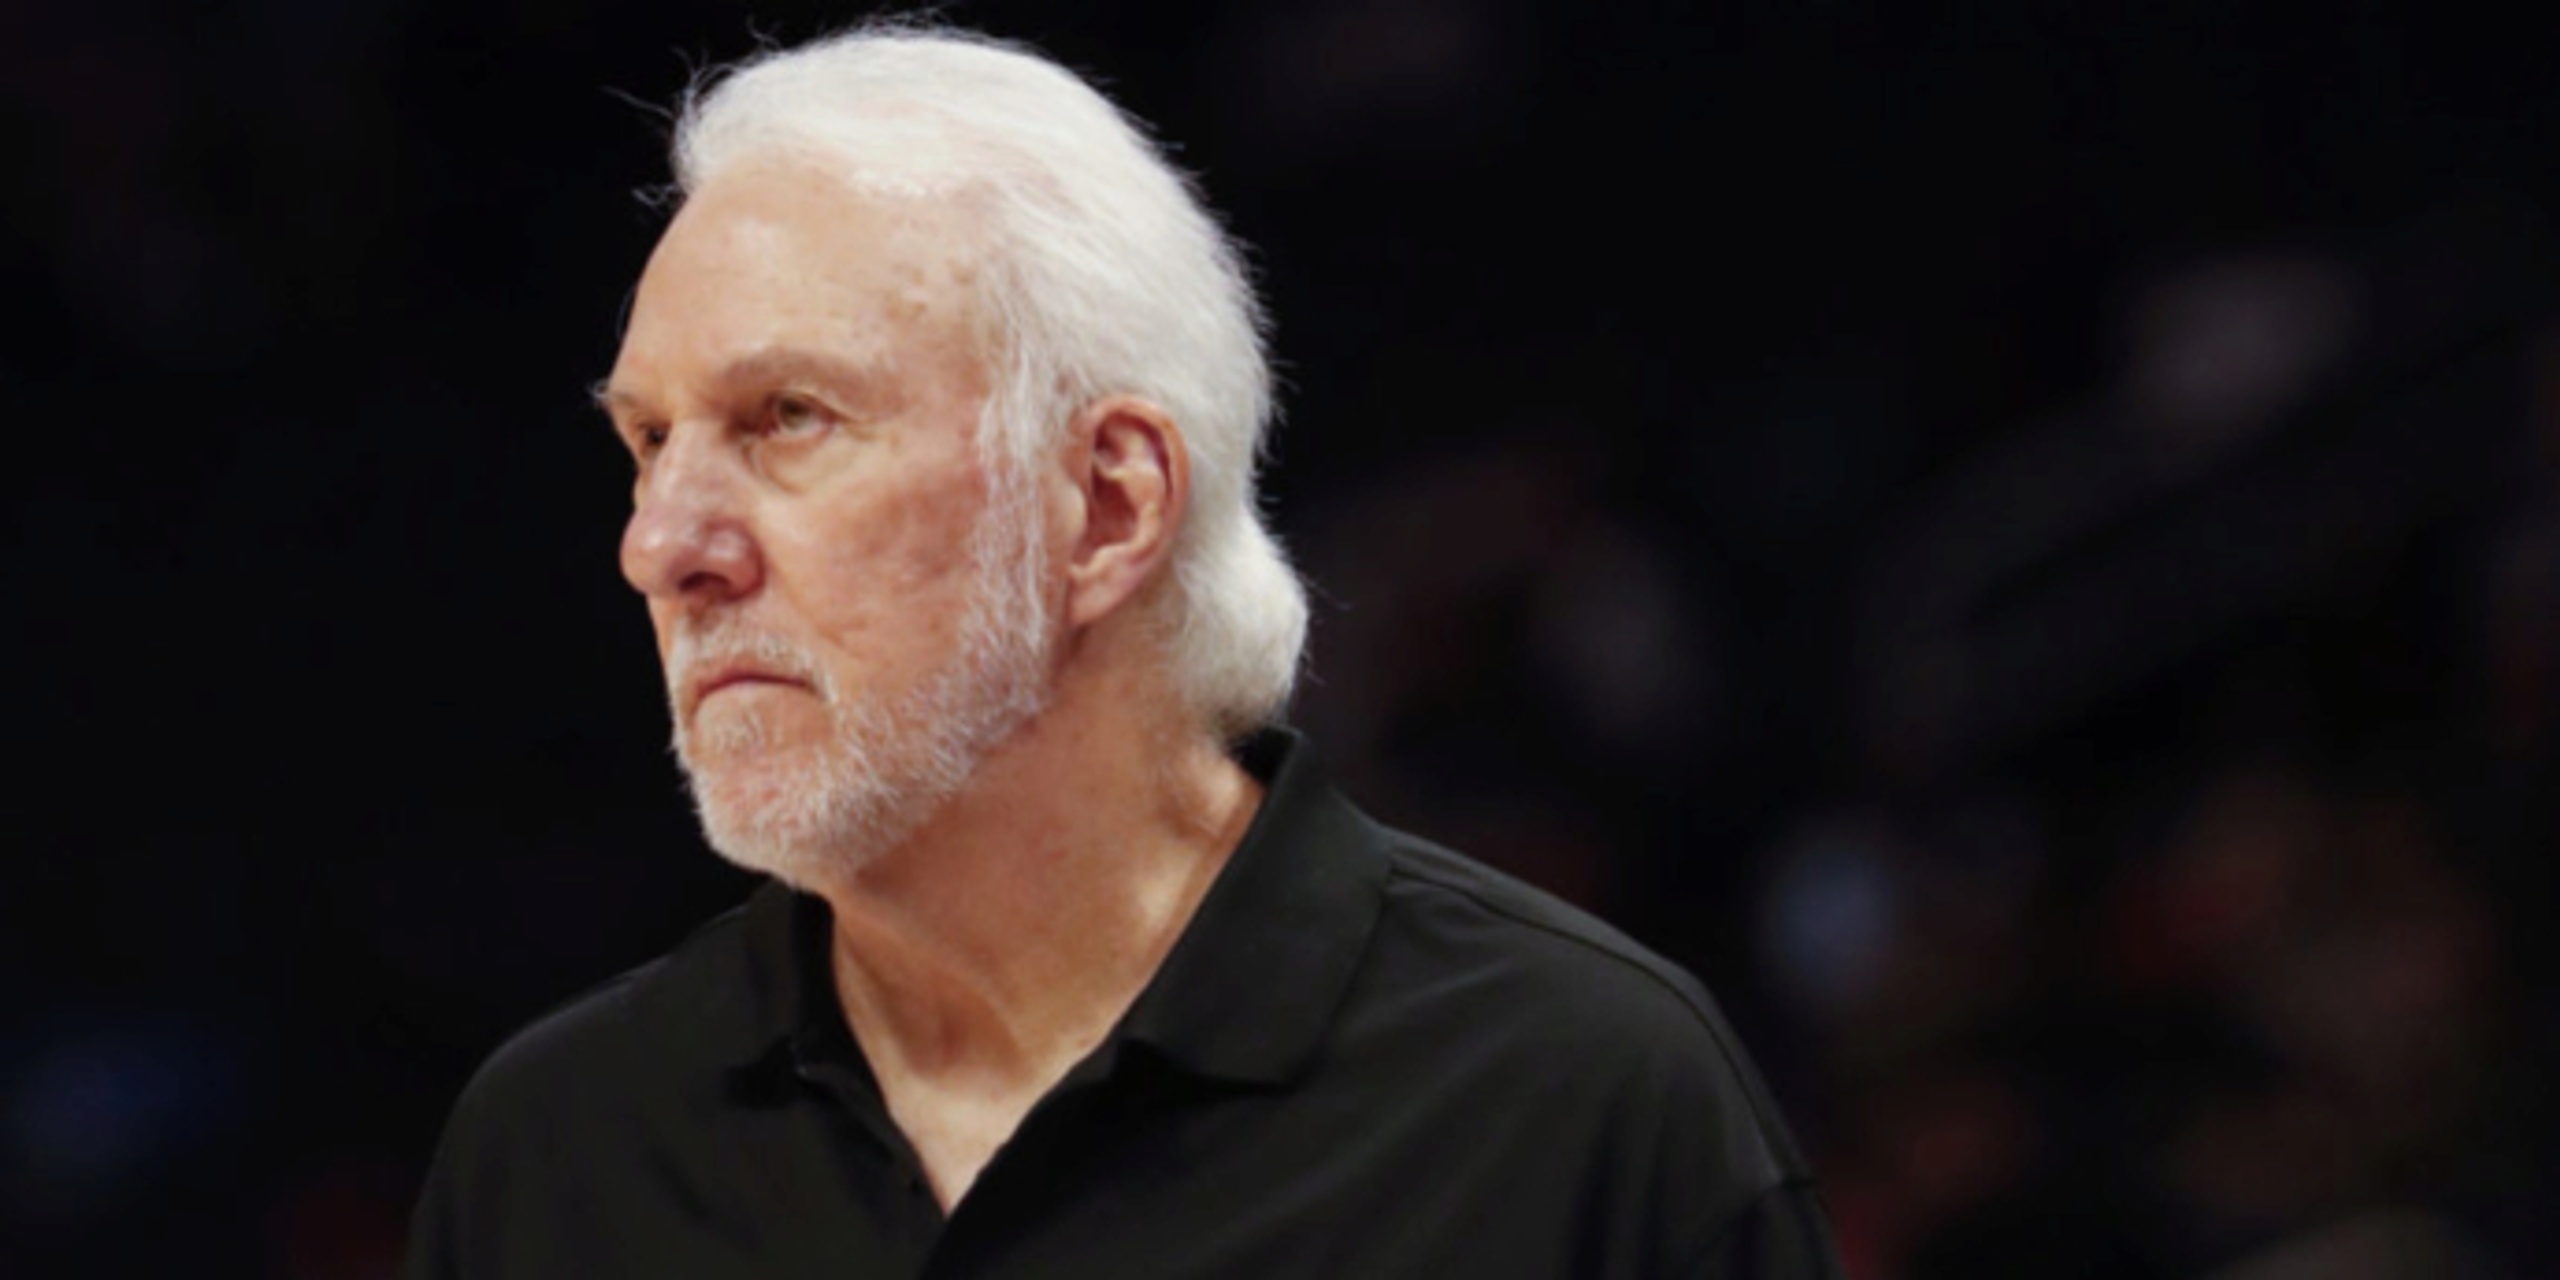 Report: 'Growing belief' Gregg Popovich could leave Spurs after 2021-22